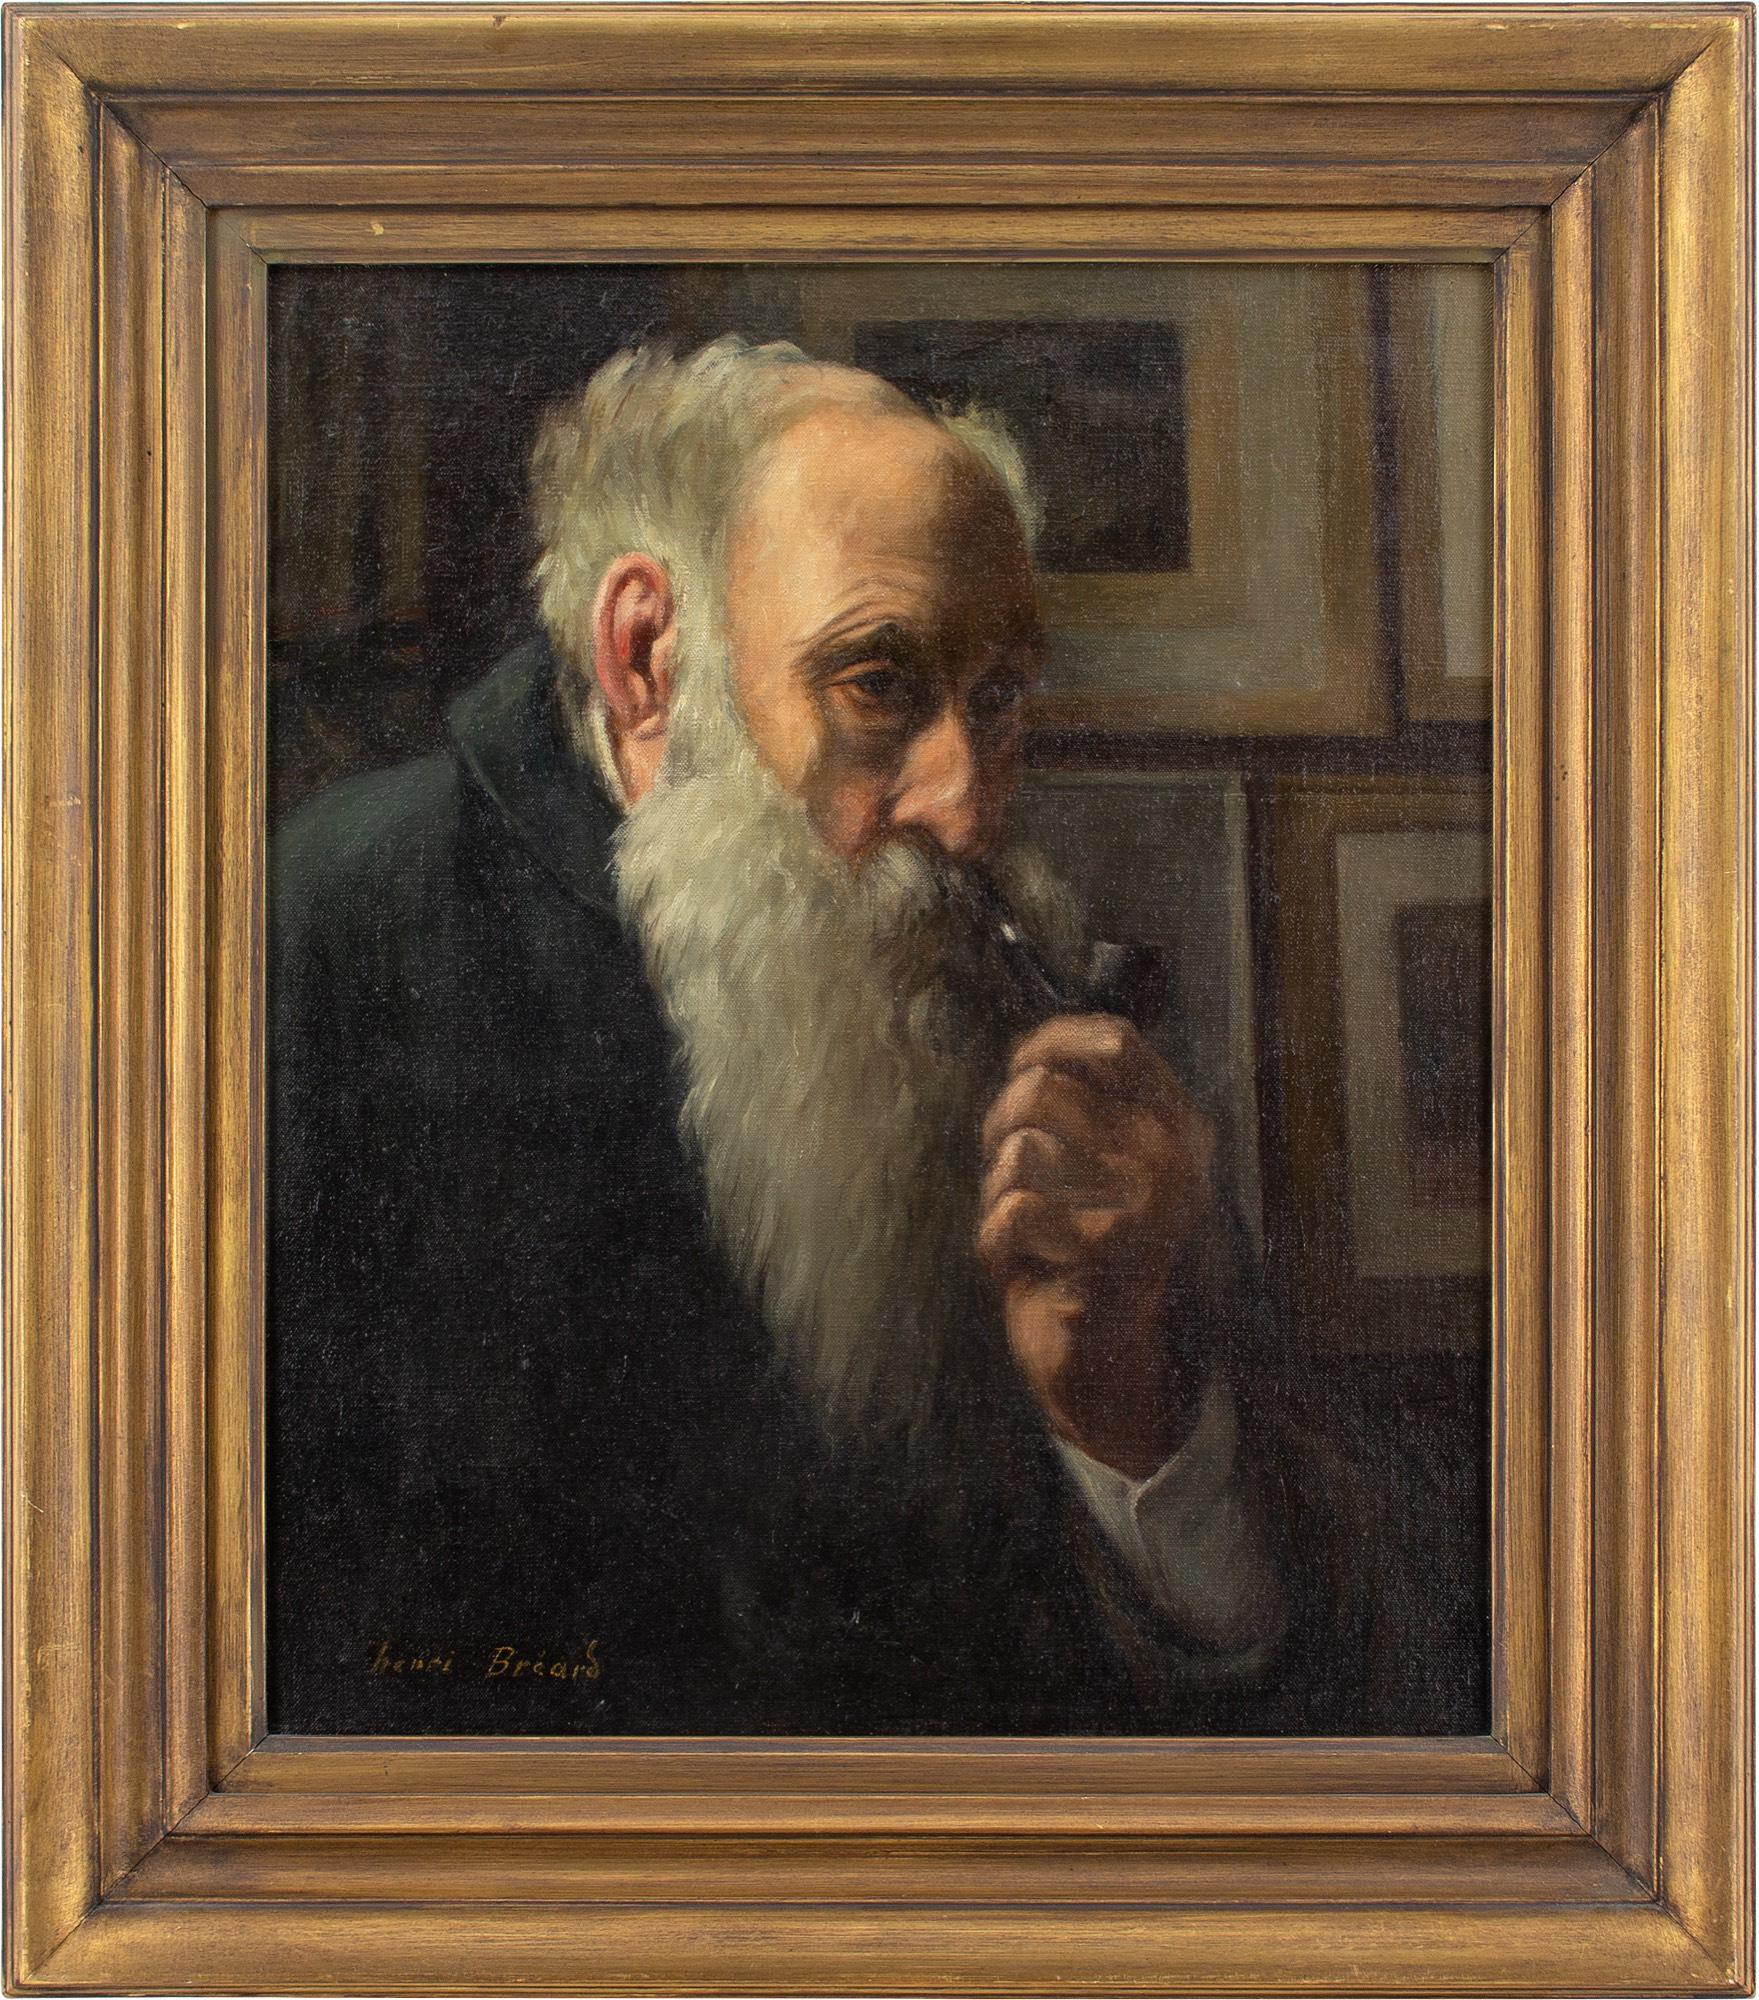 This early to mid-20th-century self-portrait by Henri-Georges Bréard (1873-c.1939) depicts the artist deep in thought. He’s holding a pipe.

Henri-Georges Bréard was an accomplished French painter of landscapes, scenes, still lifes and portraits.